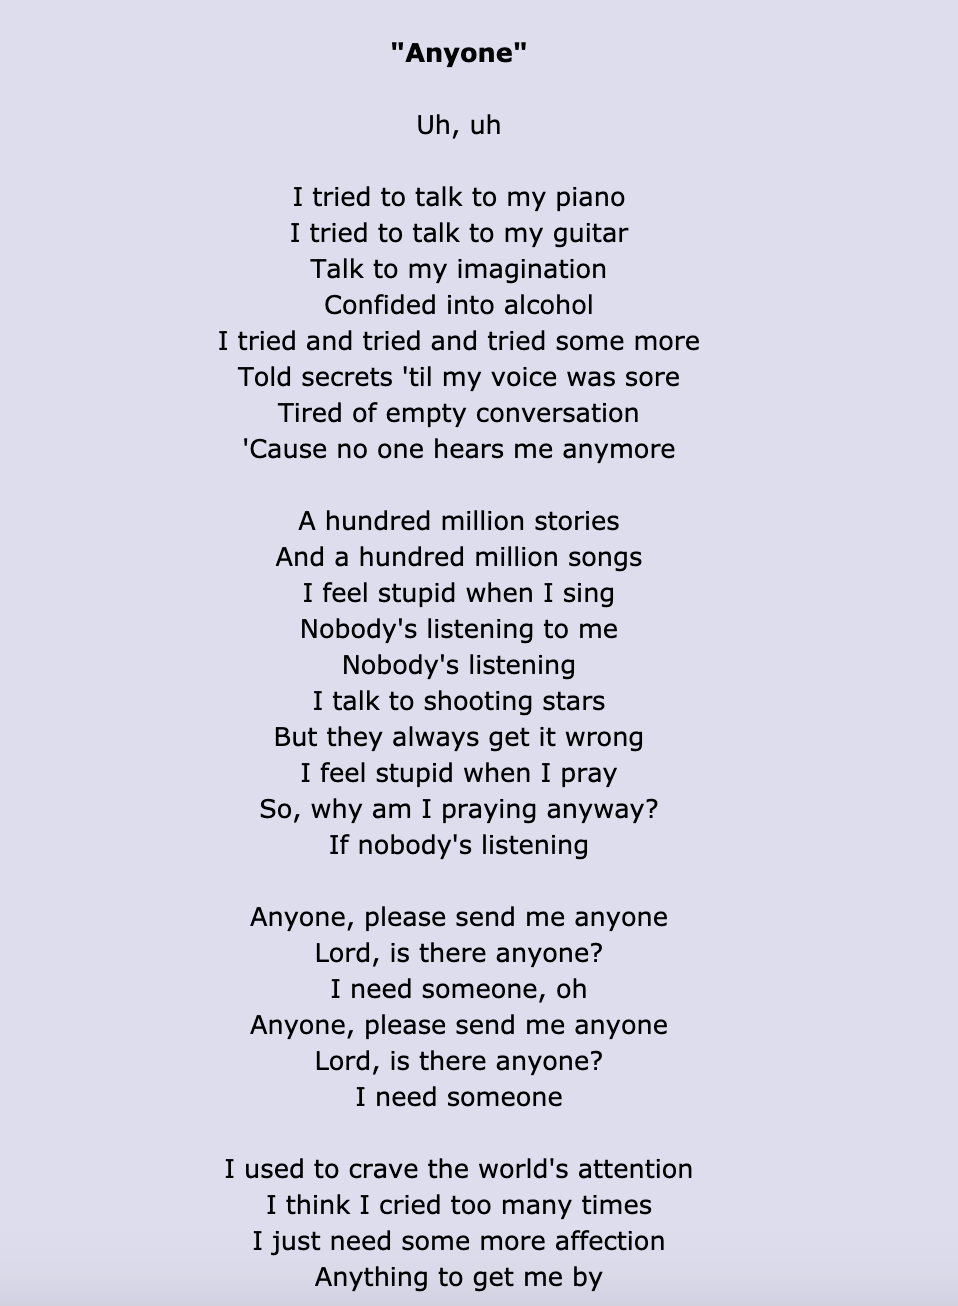 "Anyone" lyrics: "A hundred million stories and a hundred million songs/I feel stupid when I sing/Nobody's listening to me/Nobody's listening/I talk to shooting stars/But they always get it wrong"